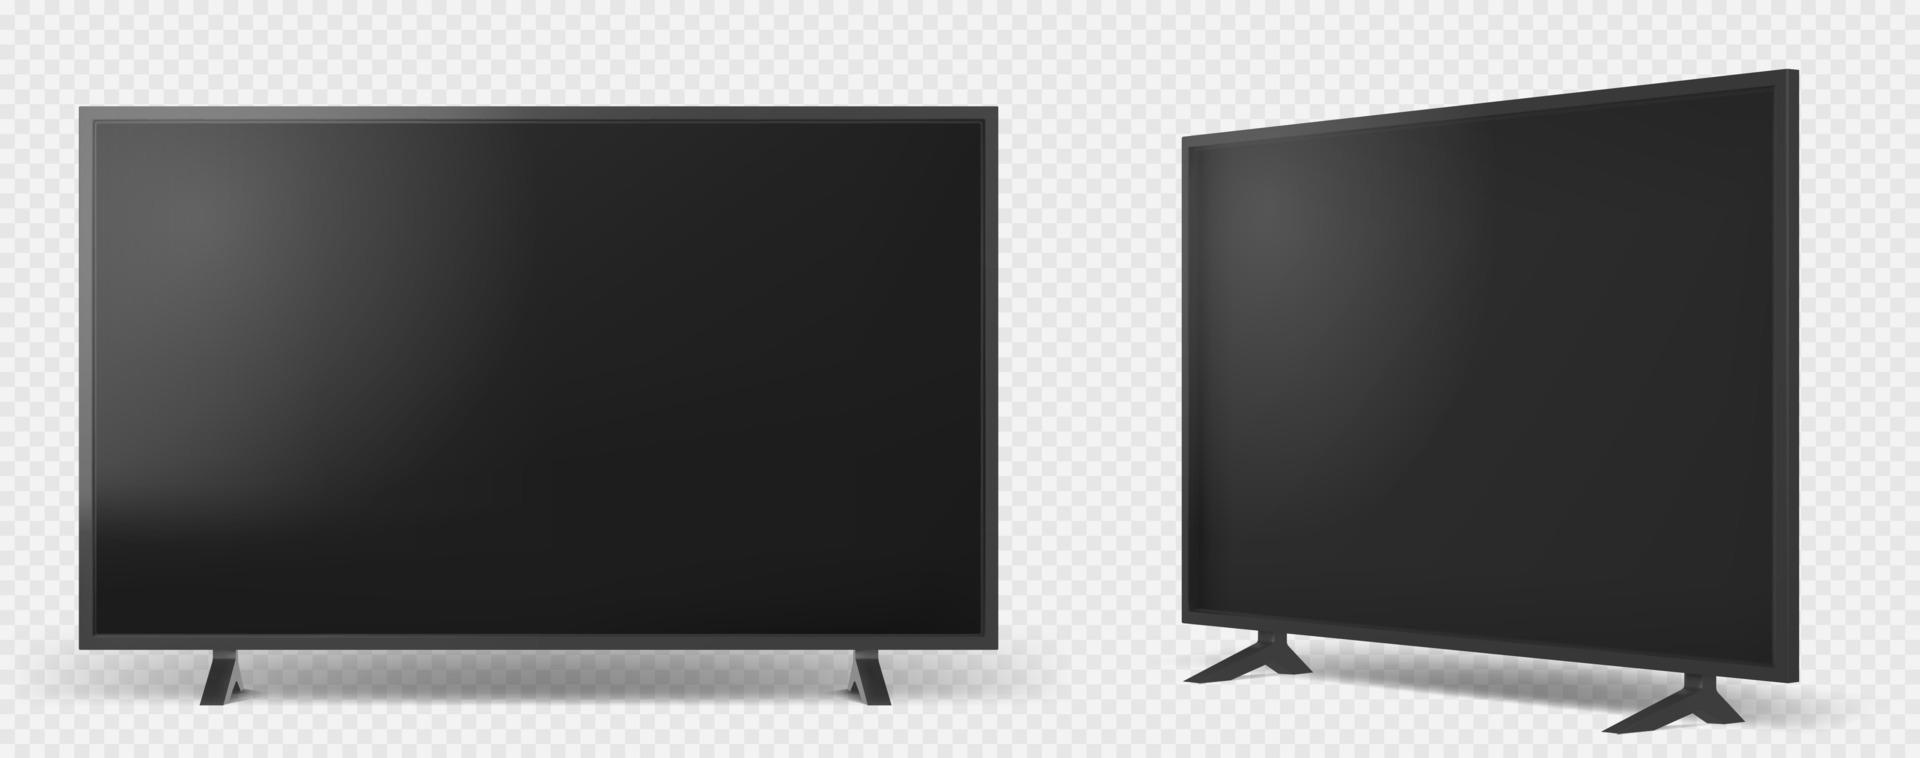 Realistic tv isolated on white background vector